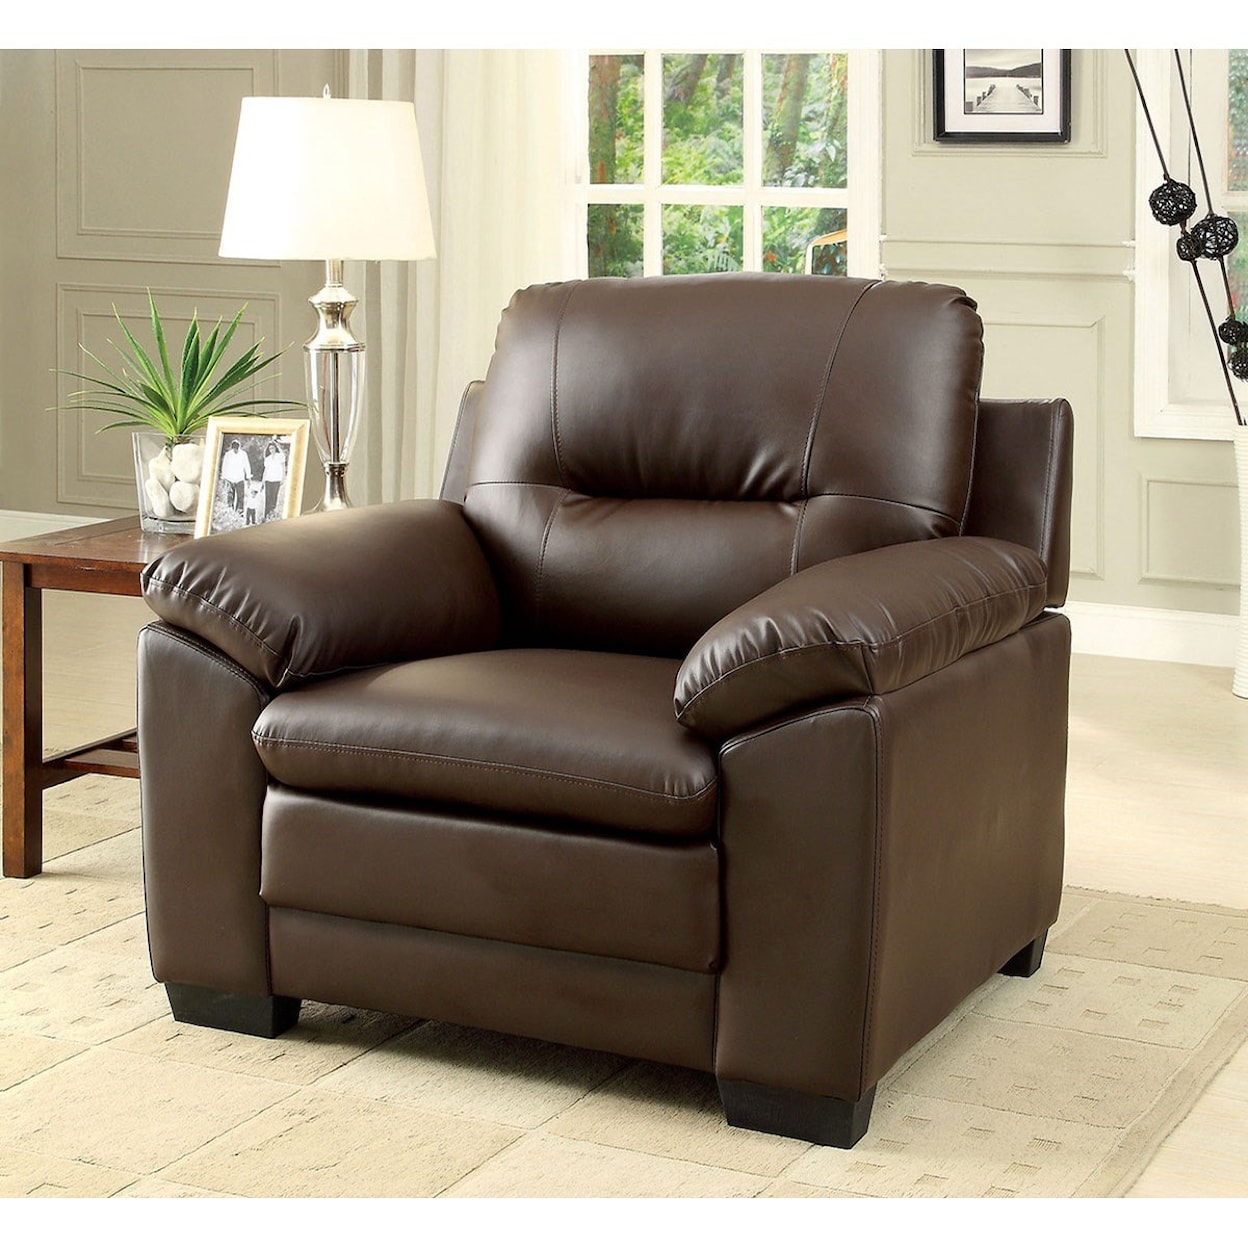 Furniture of America Parma Casual Chair